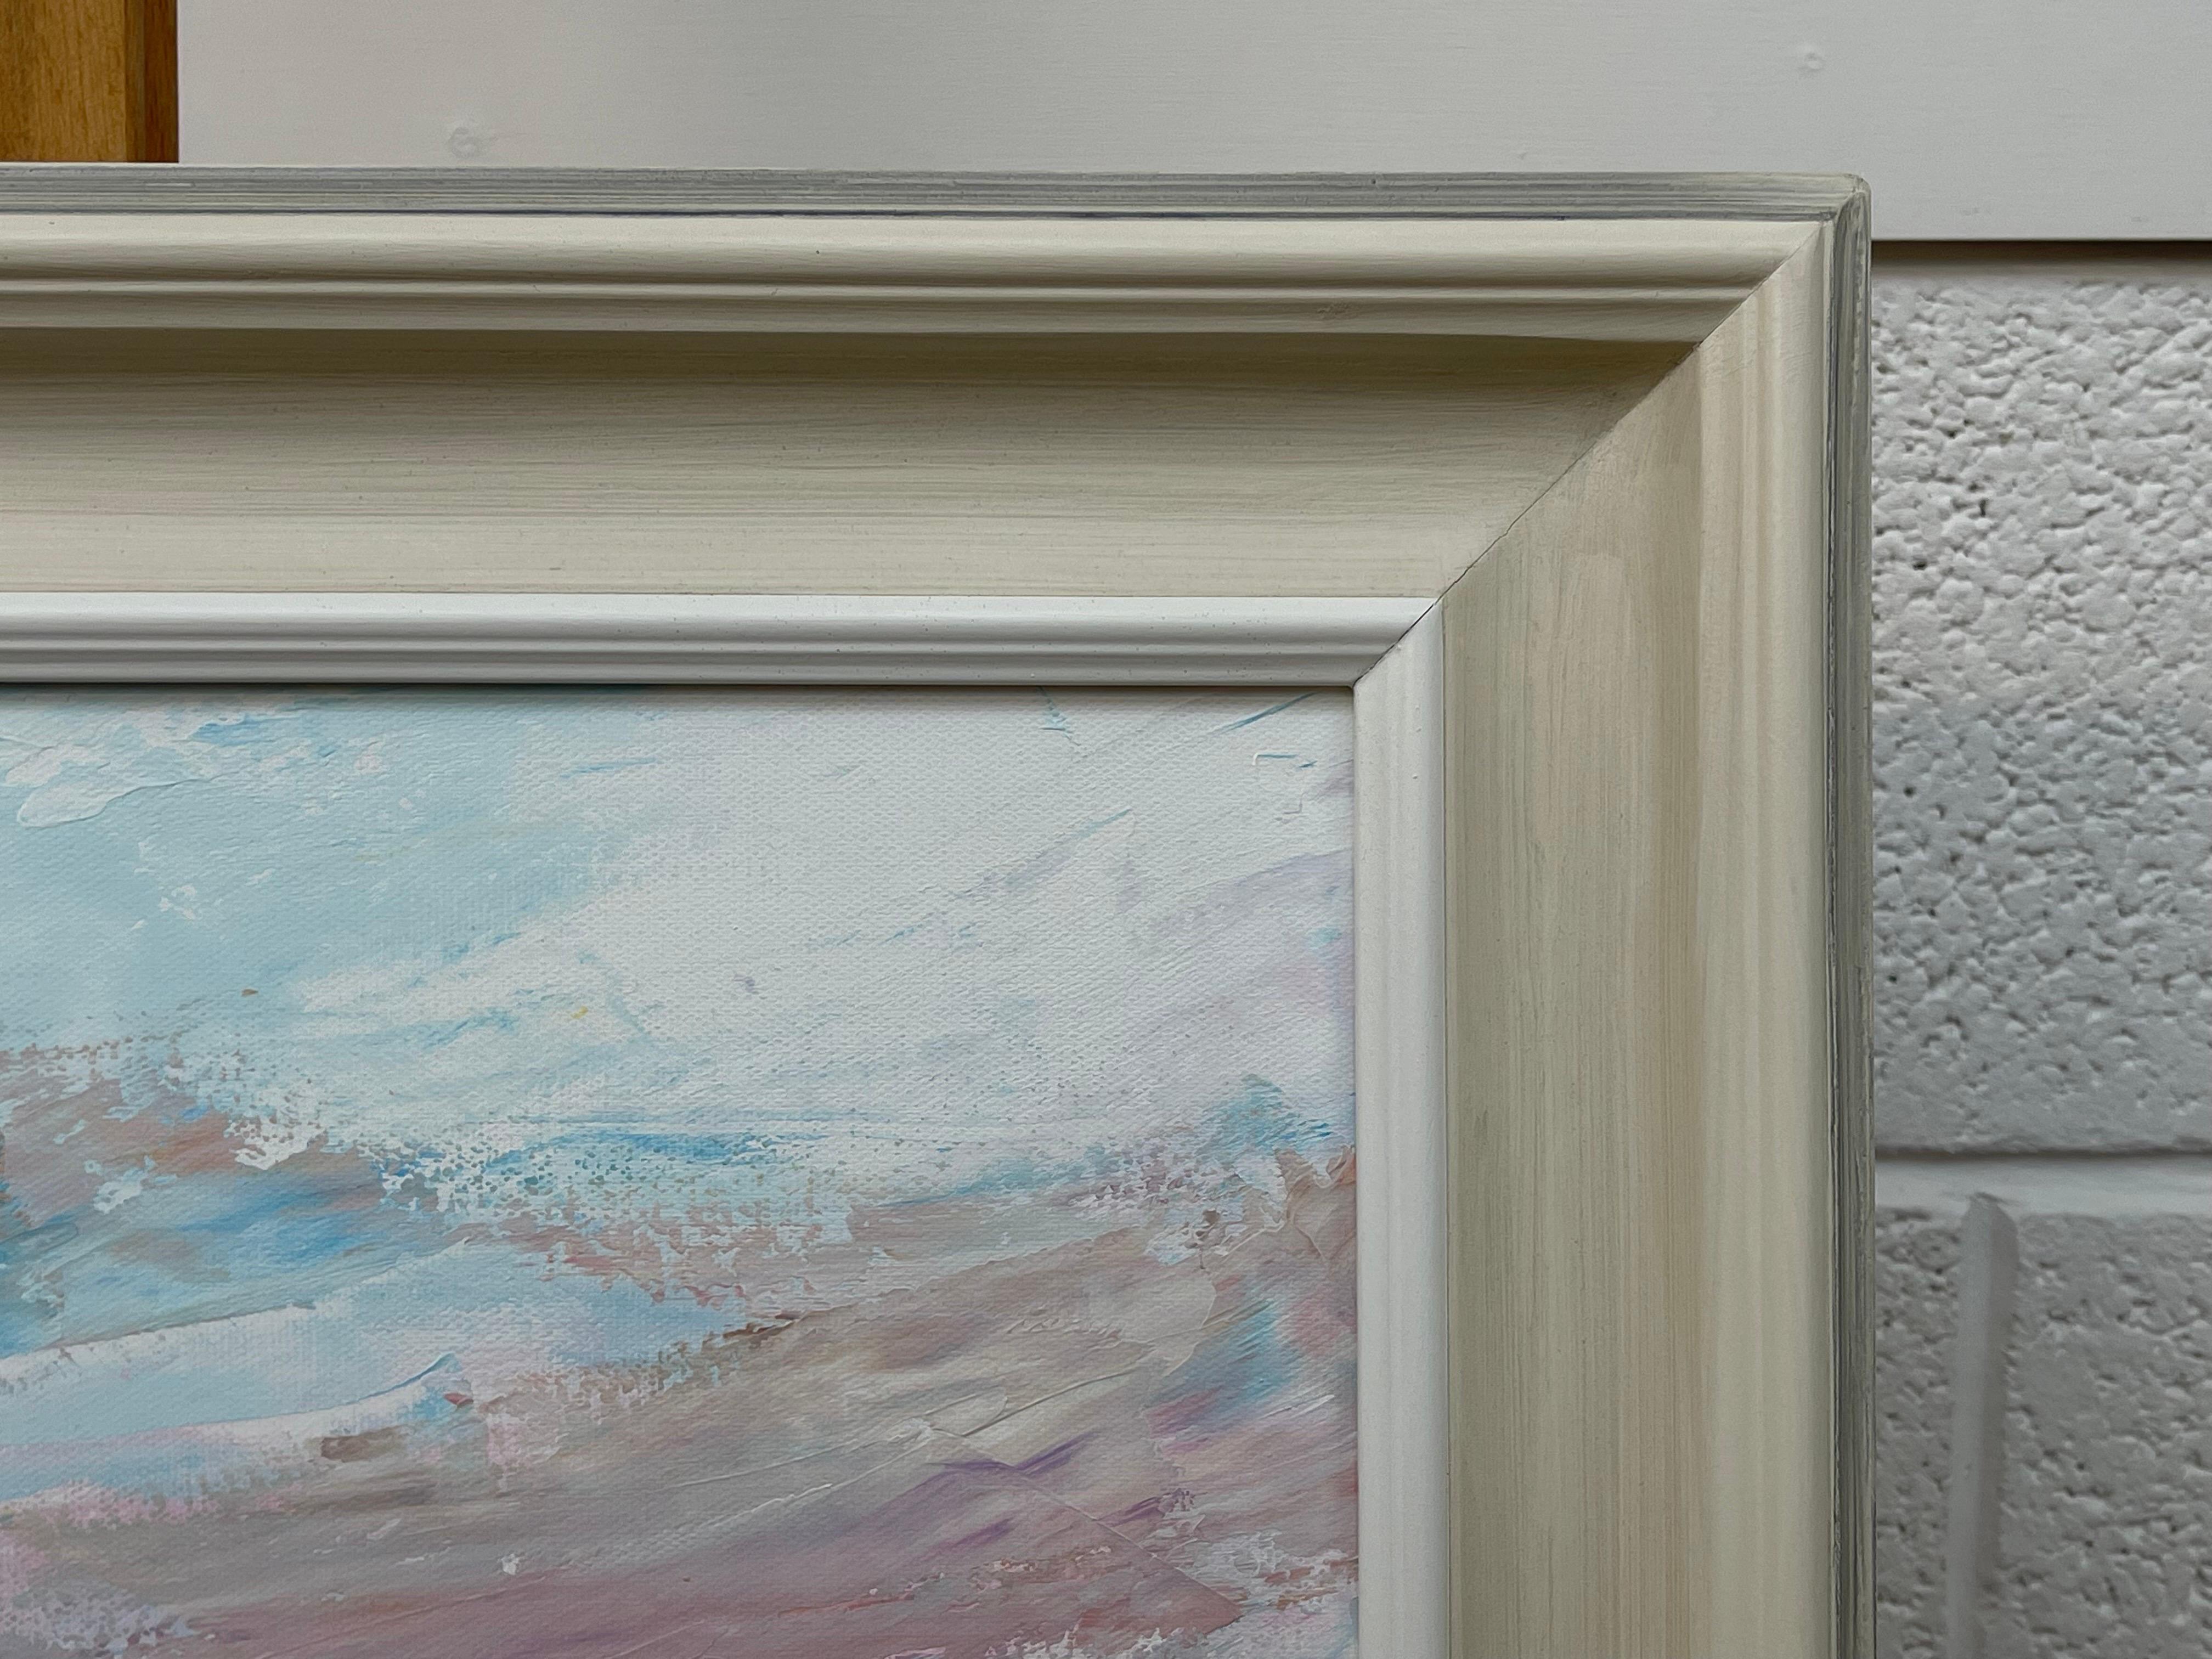 Abstract Impressionist Seascape Landscape by Contemporary British Artist, Angela Wakefield. Entitled 'Serenity #02', this atmospheric painting depicts an imagined scene using muted pastel colours. This unique original forms part of a new body of